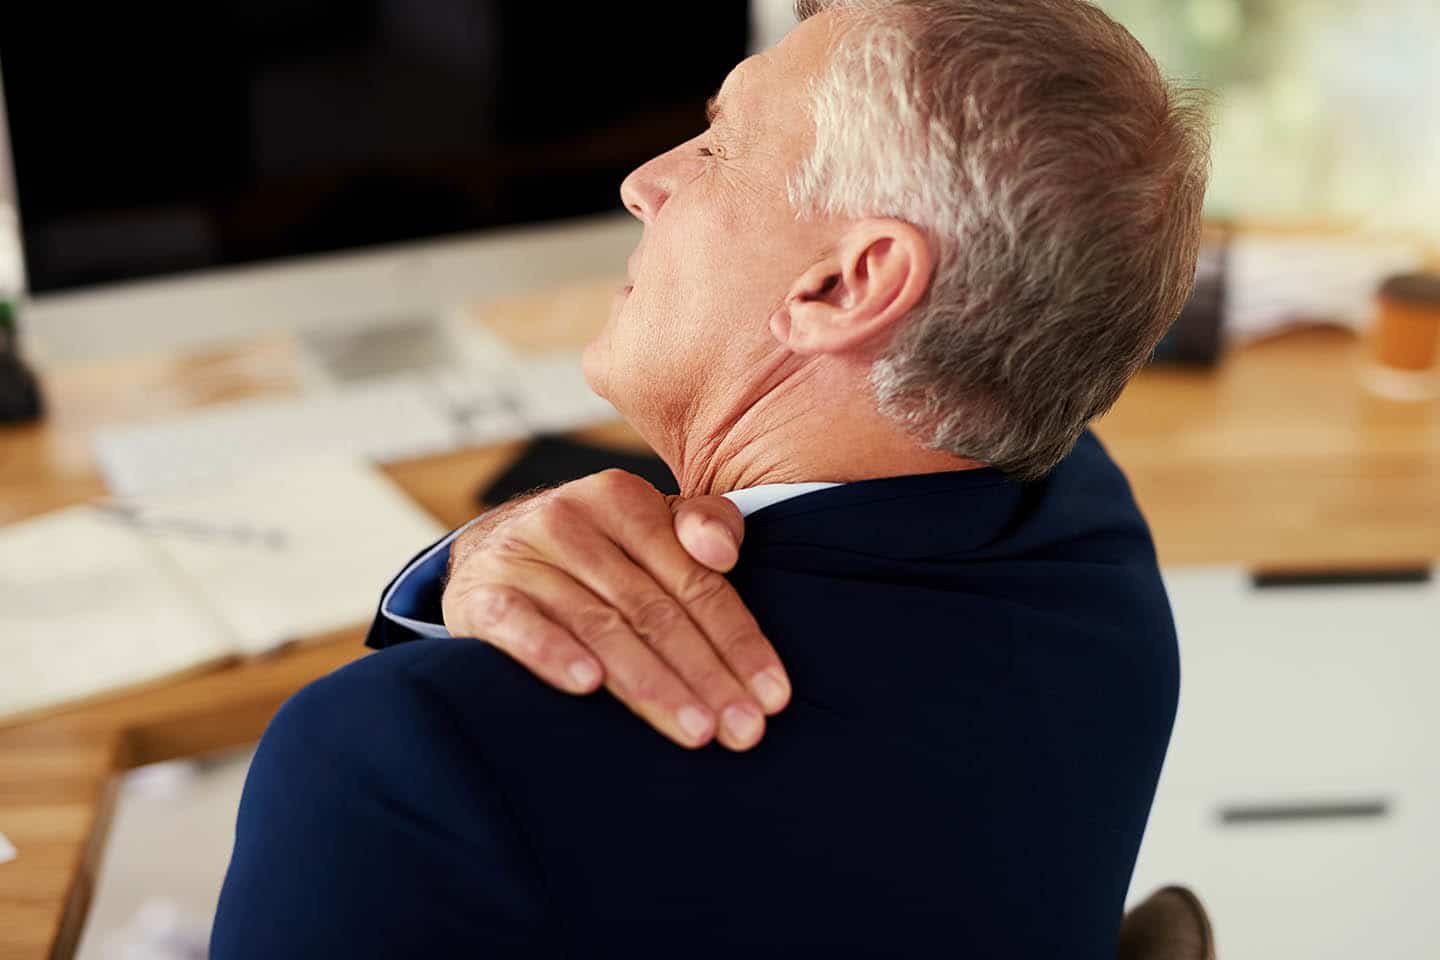 A man rubbing the back of his shoulder